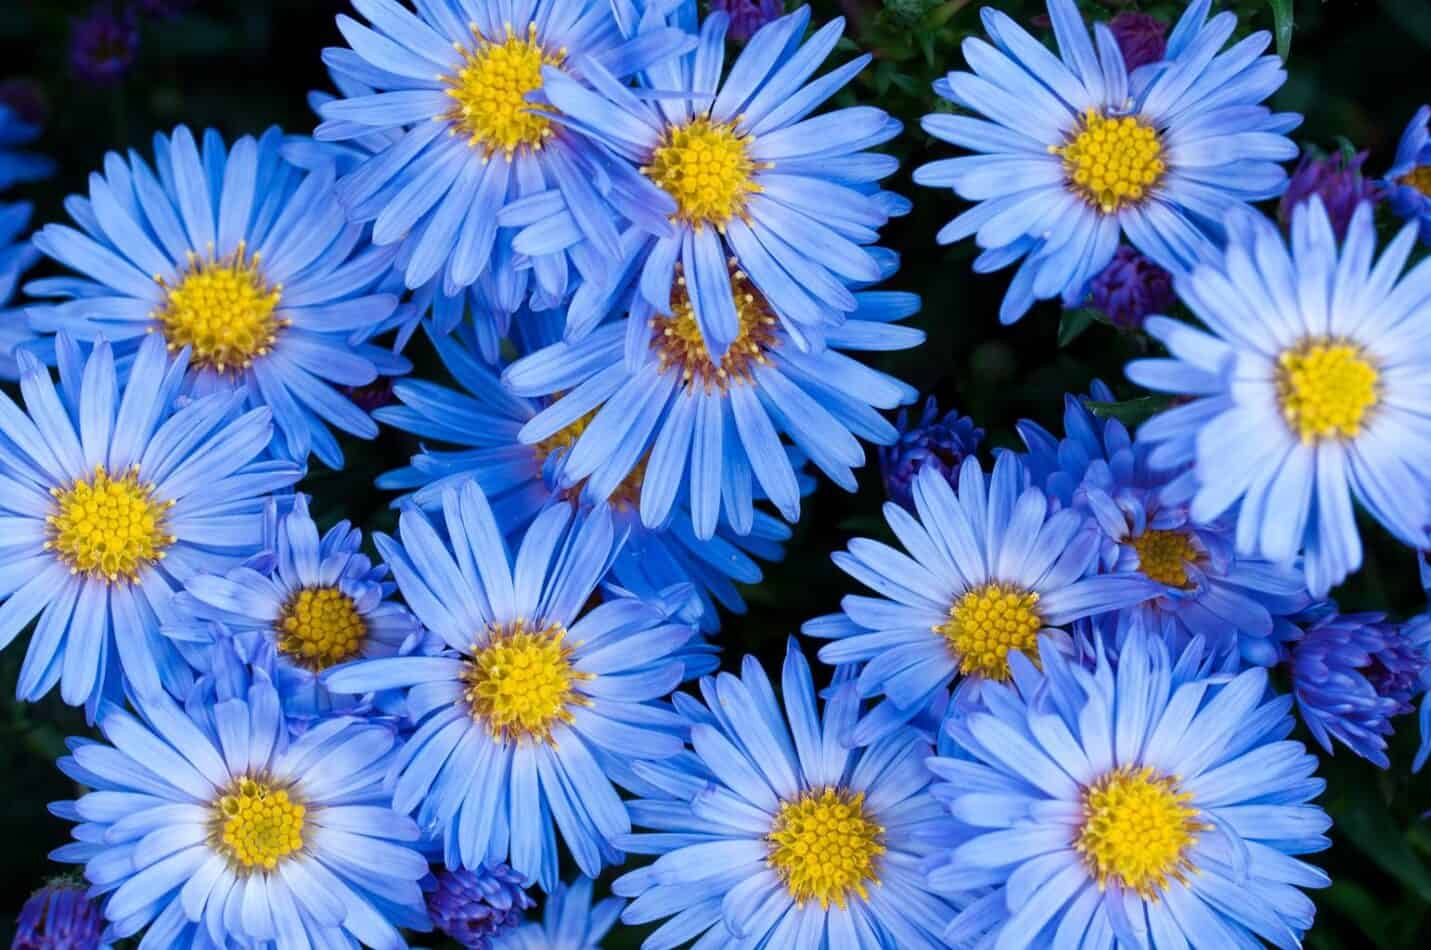 Which Flowers Are Blue?